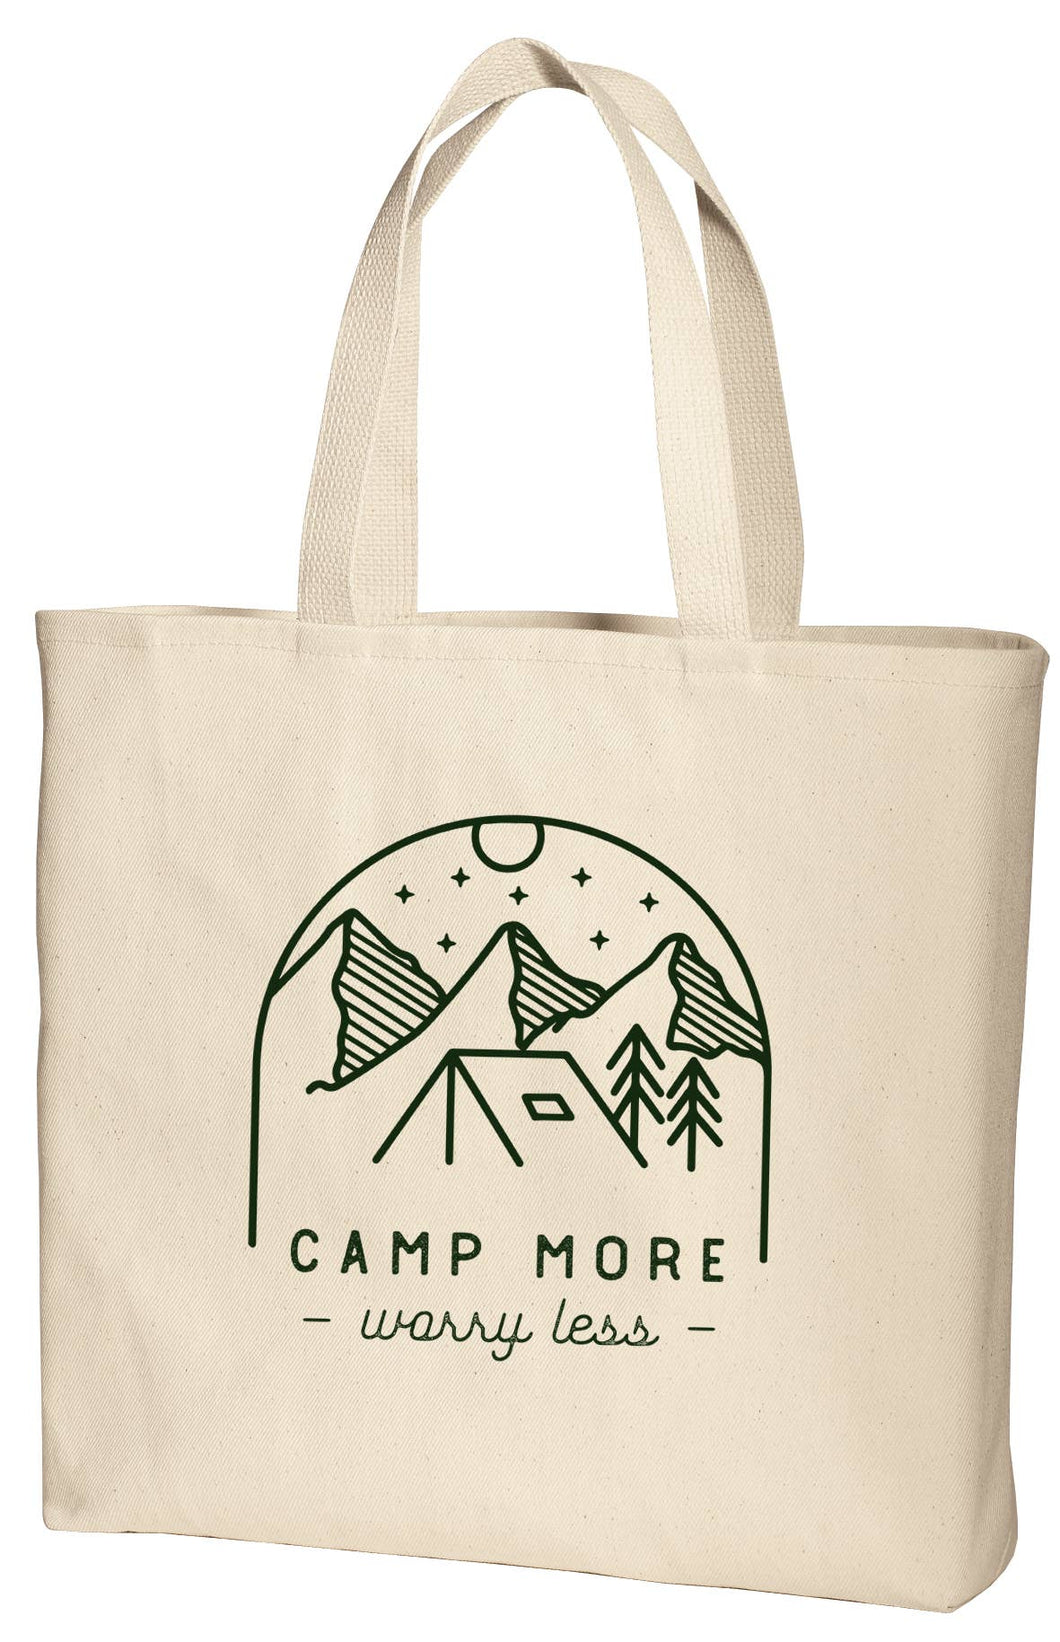 Camp More Worry Less Canvas Tote Bag